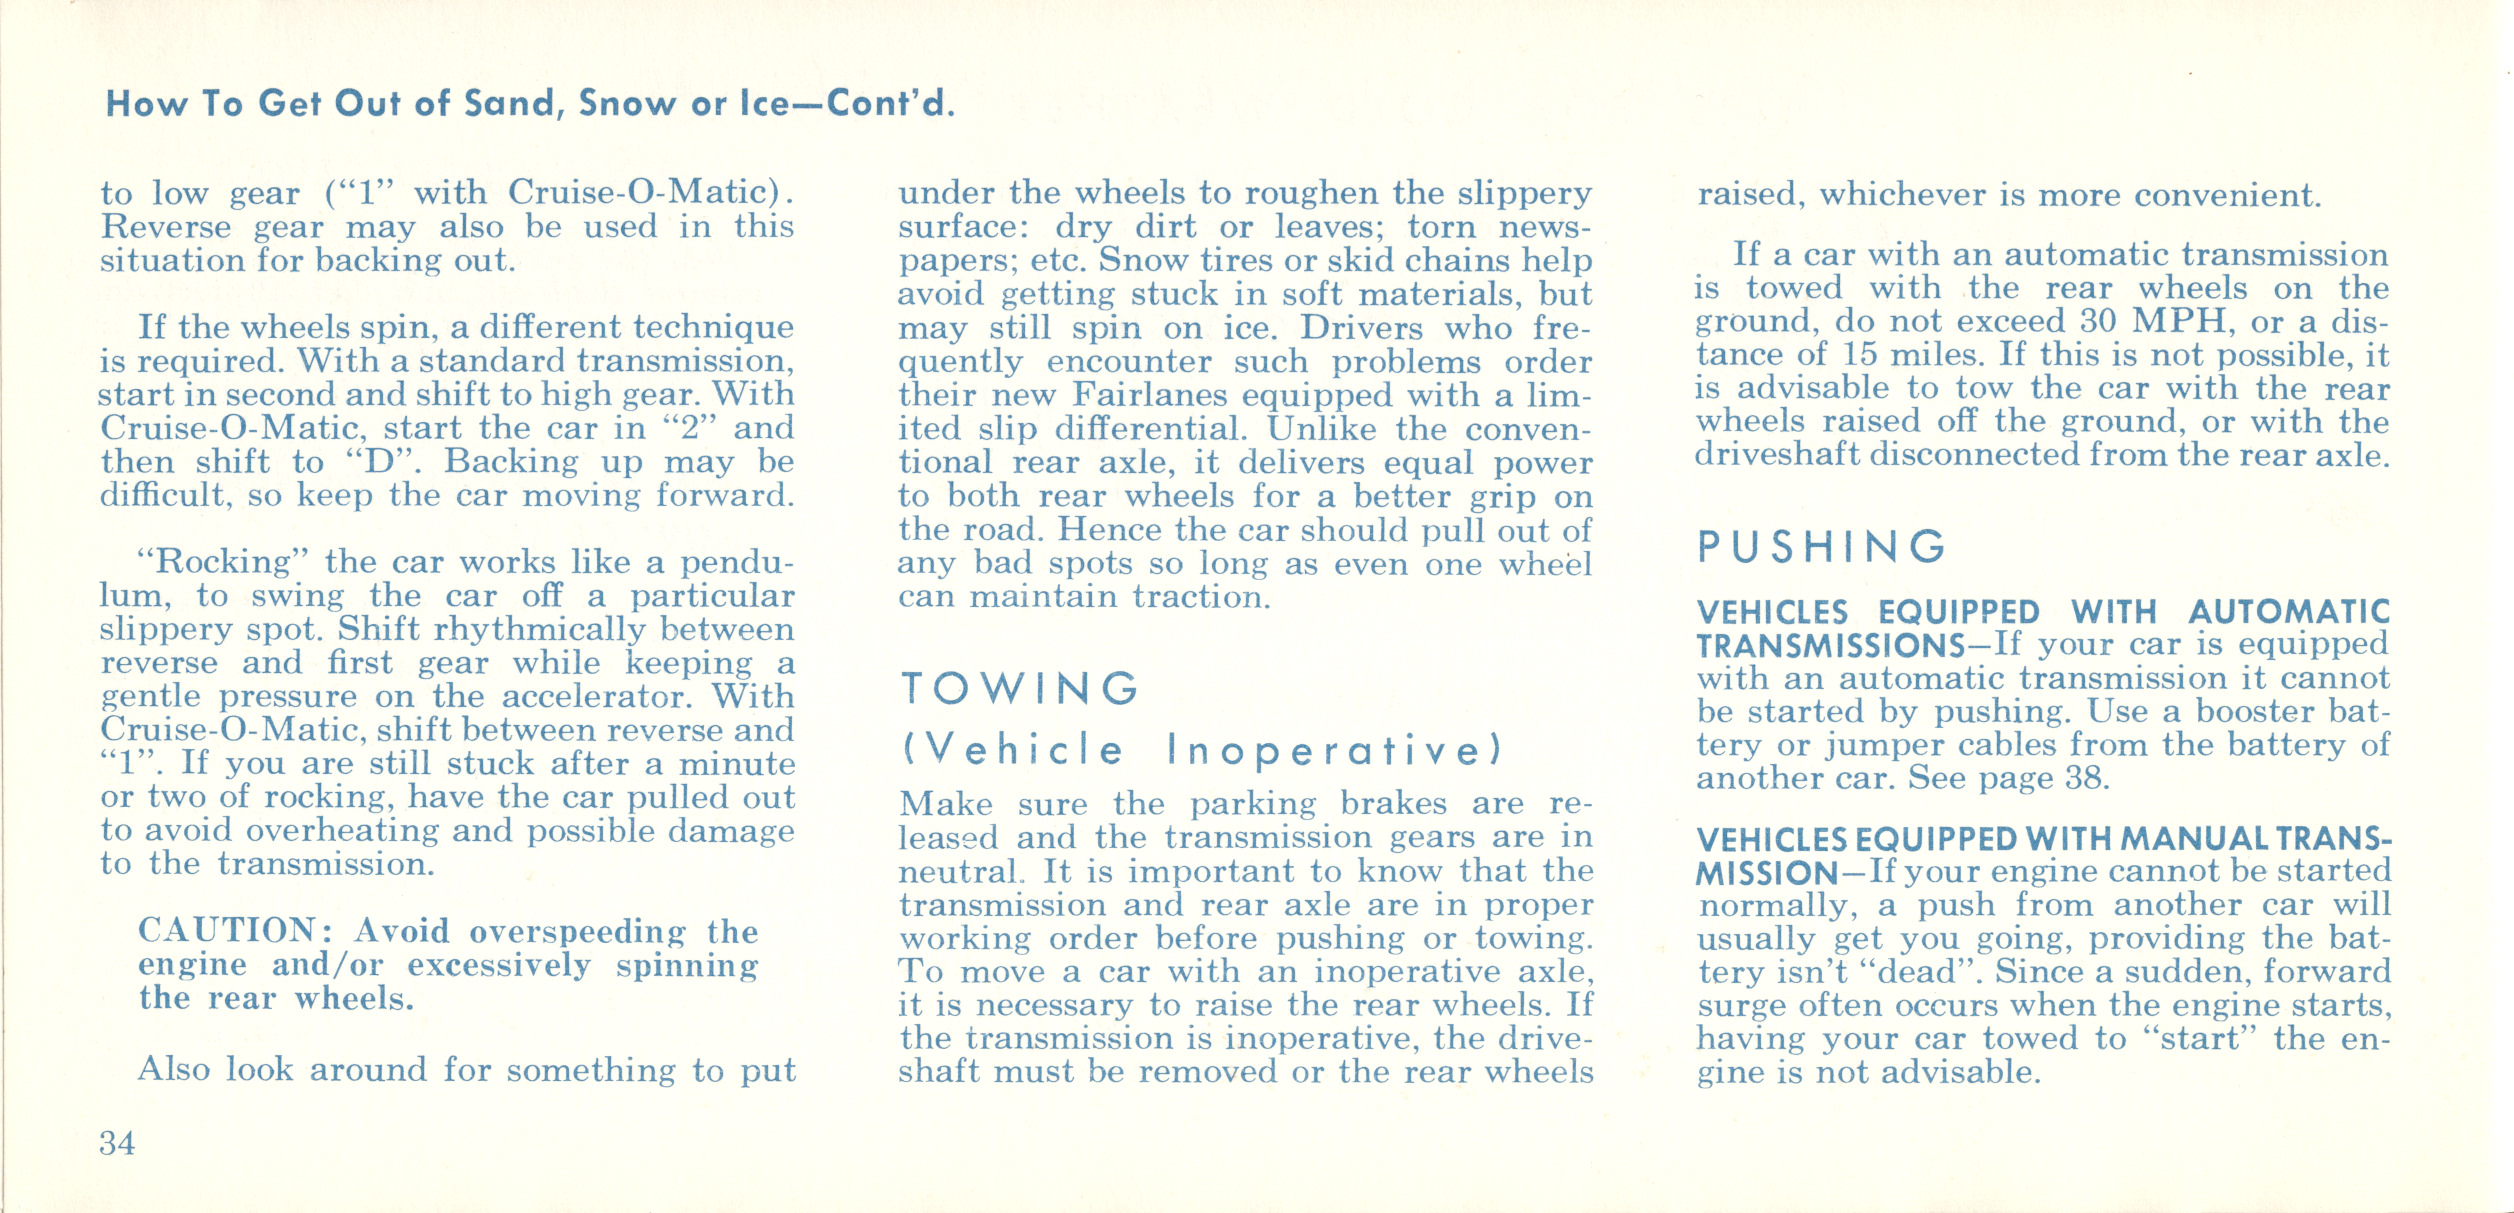 1968_Ford_Fairlane_Owners_Manual-34